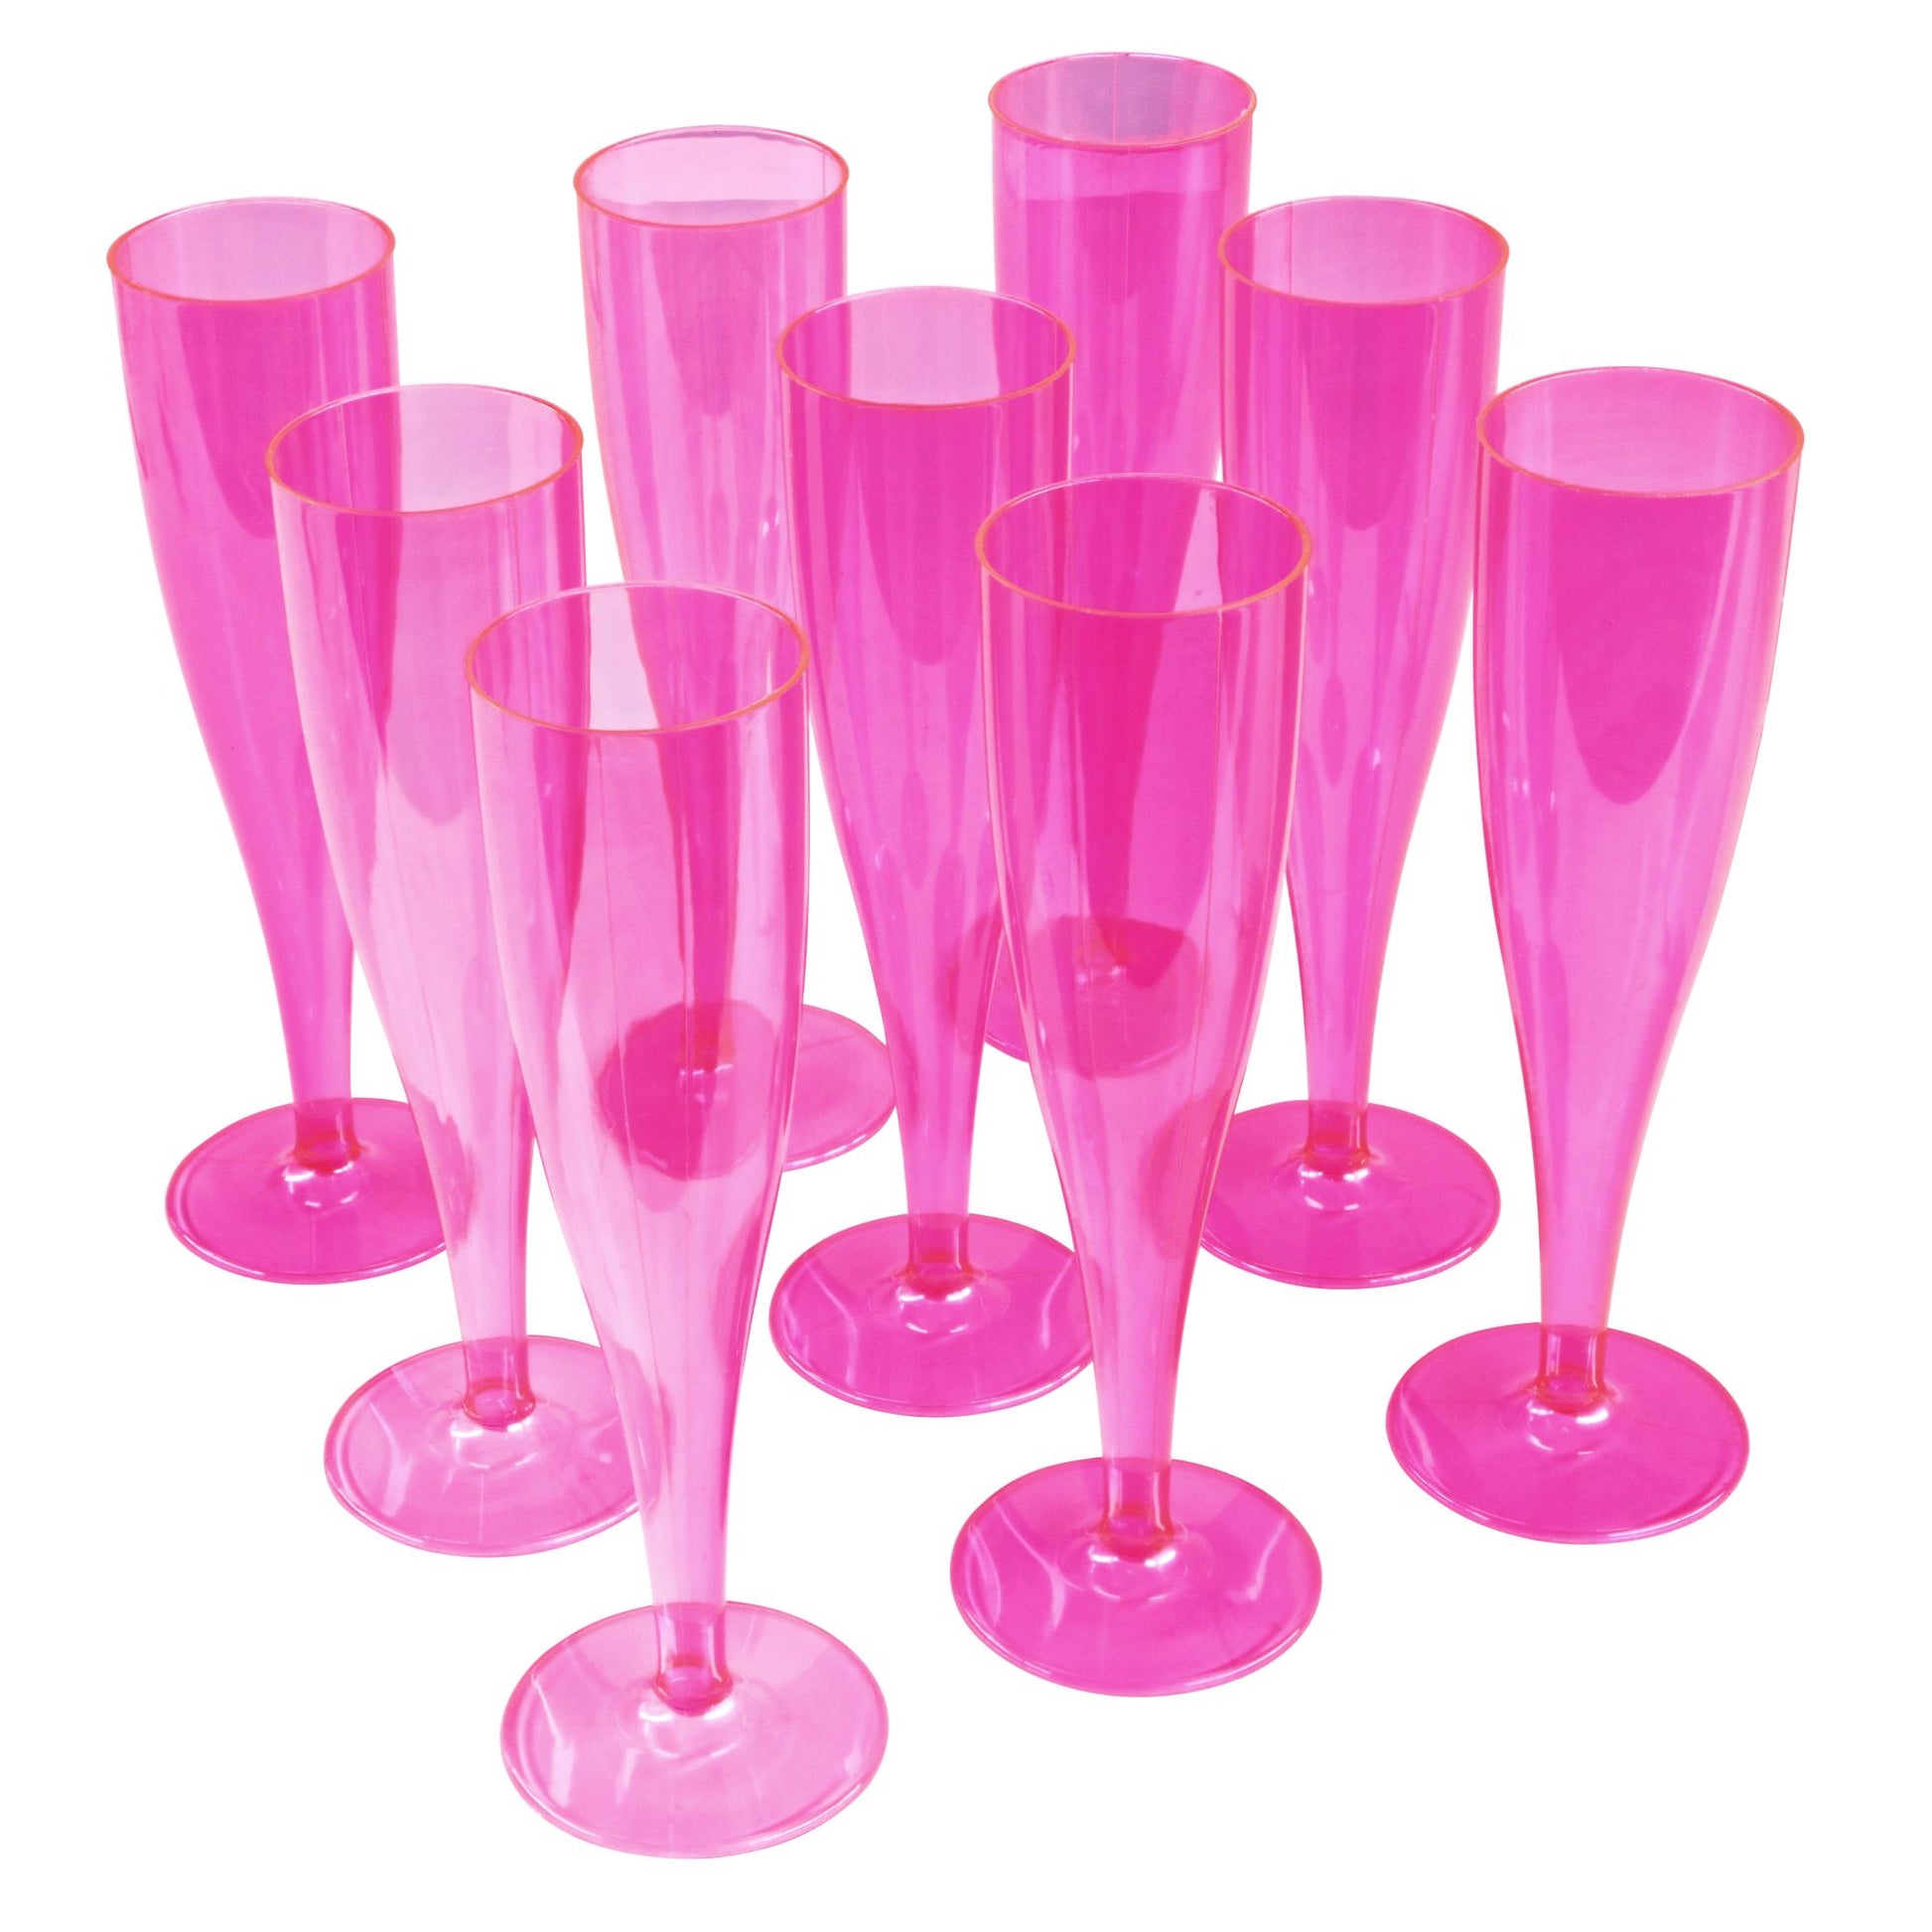 20 x Pink Prosecco Flutes 175ml 6oz Capacity Recyclable Polystyrene Material Transparent 1-Piece Sturdy Champagne Glasses BBQs Picnics-5056020109952-PCUP-CHAMPPINKx2-Product Pro-Champagne Glasses, Clear Champagne Glasses, Pink, Plastic Flutes, Prosecco Flutes